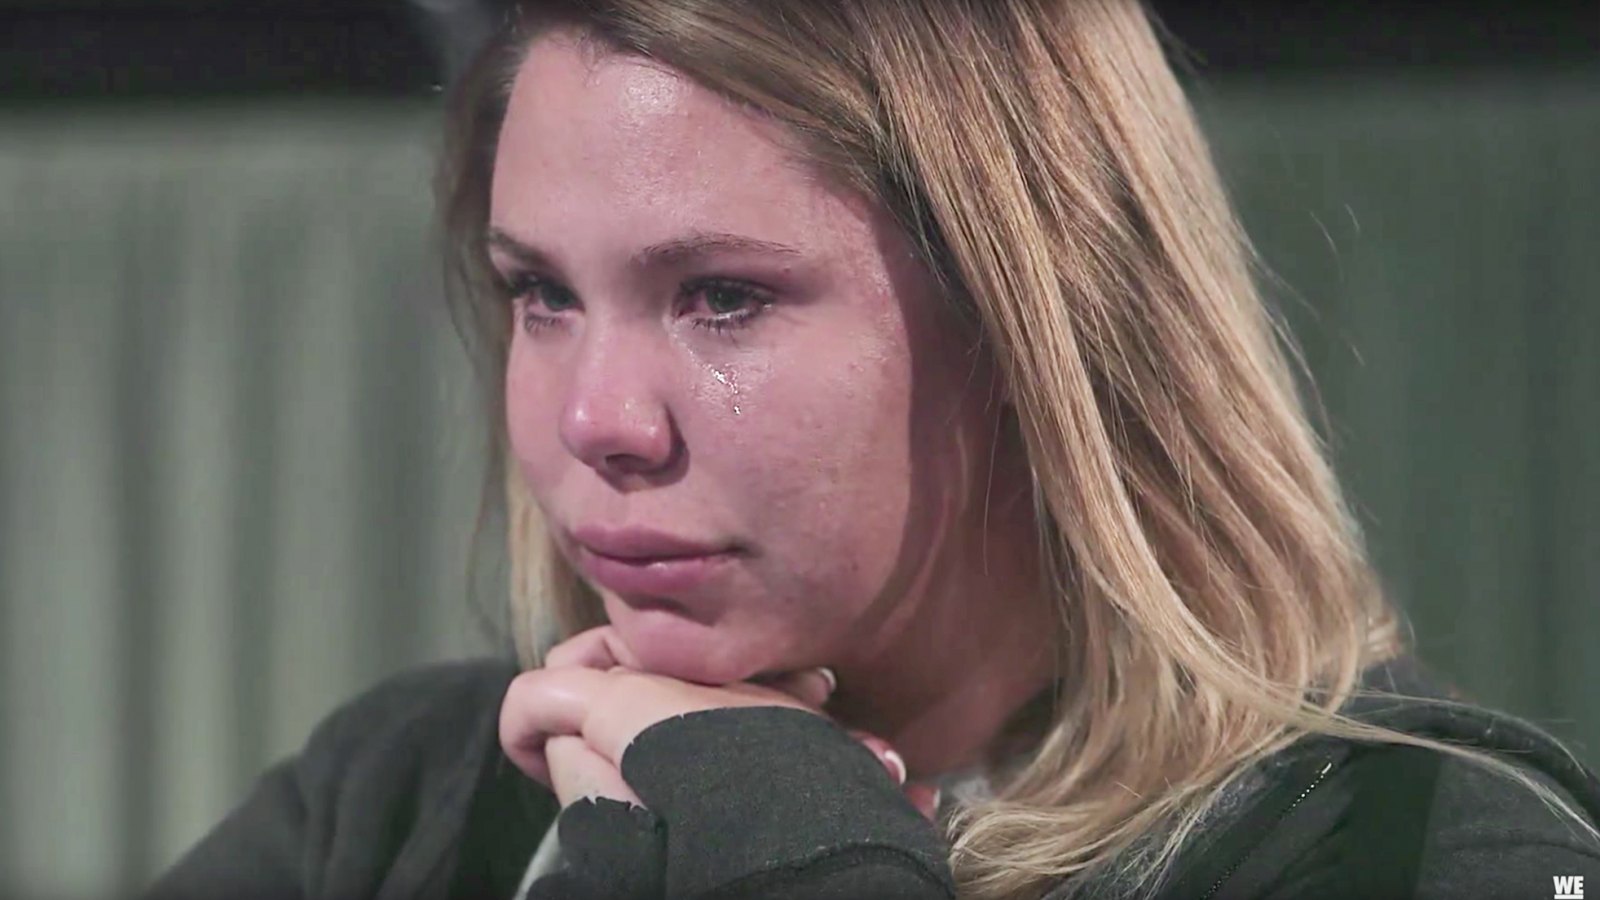 Kailyn Lowry on 'Marriage Boot Camp'